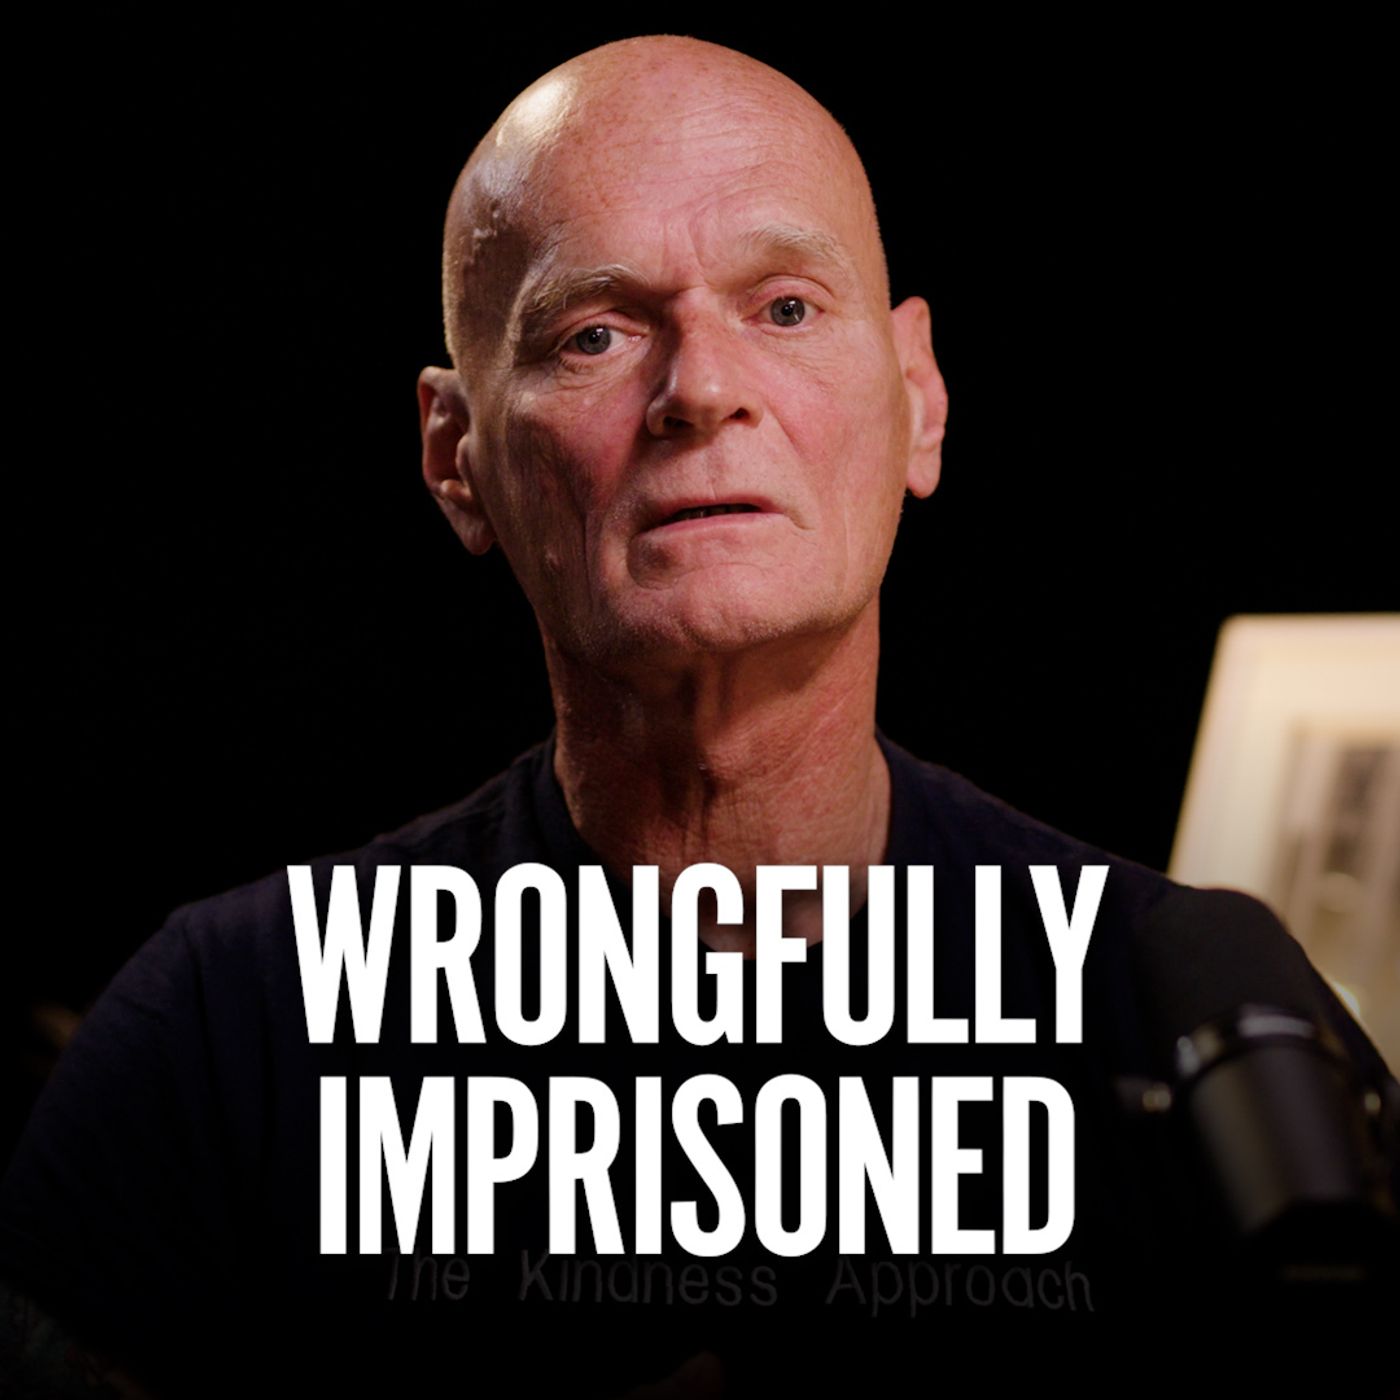 S2 Ep9: I Was Innocent But Spent 22 Years On Death Row